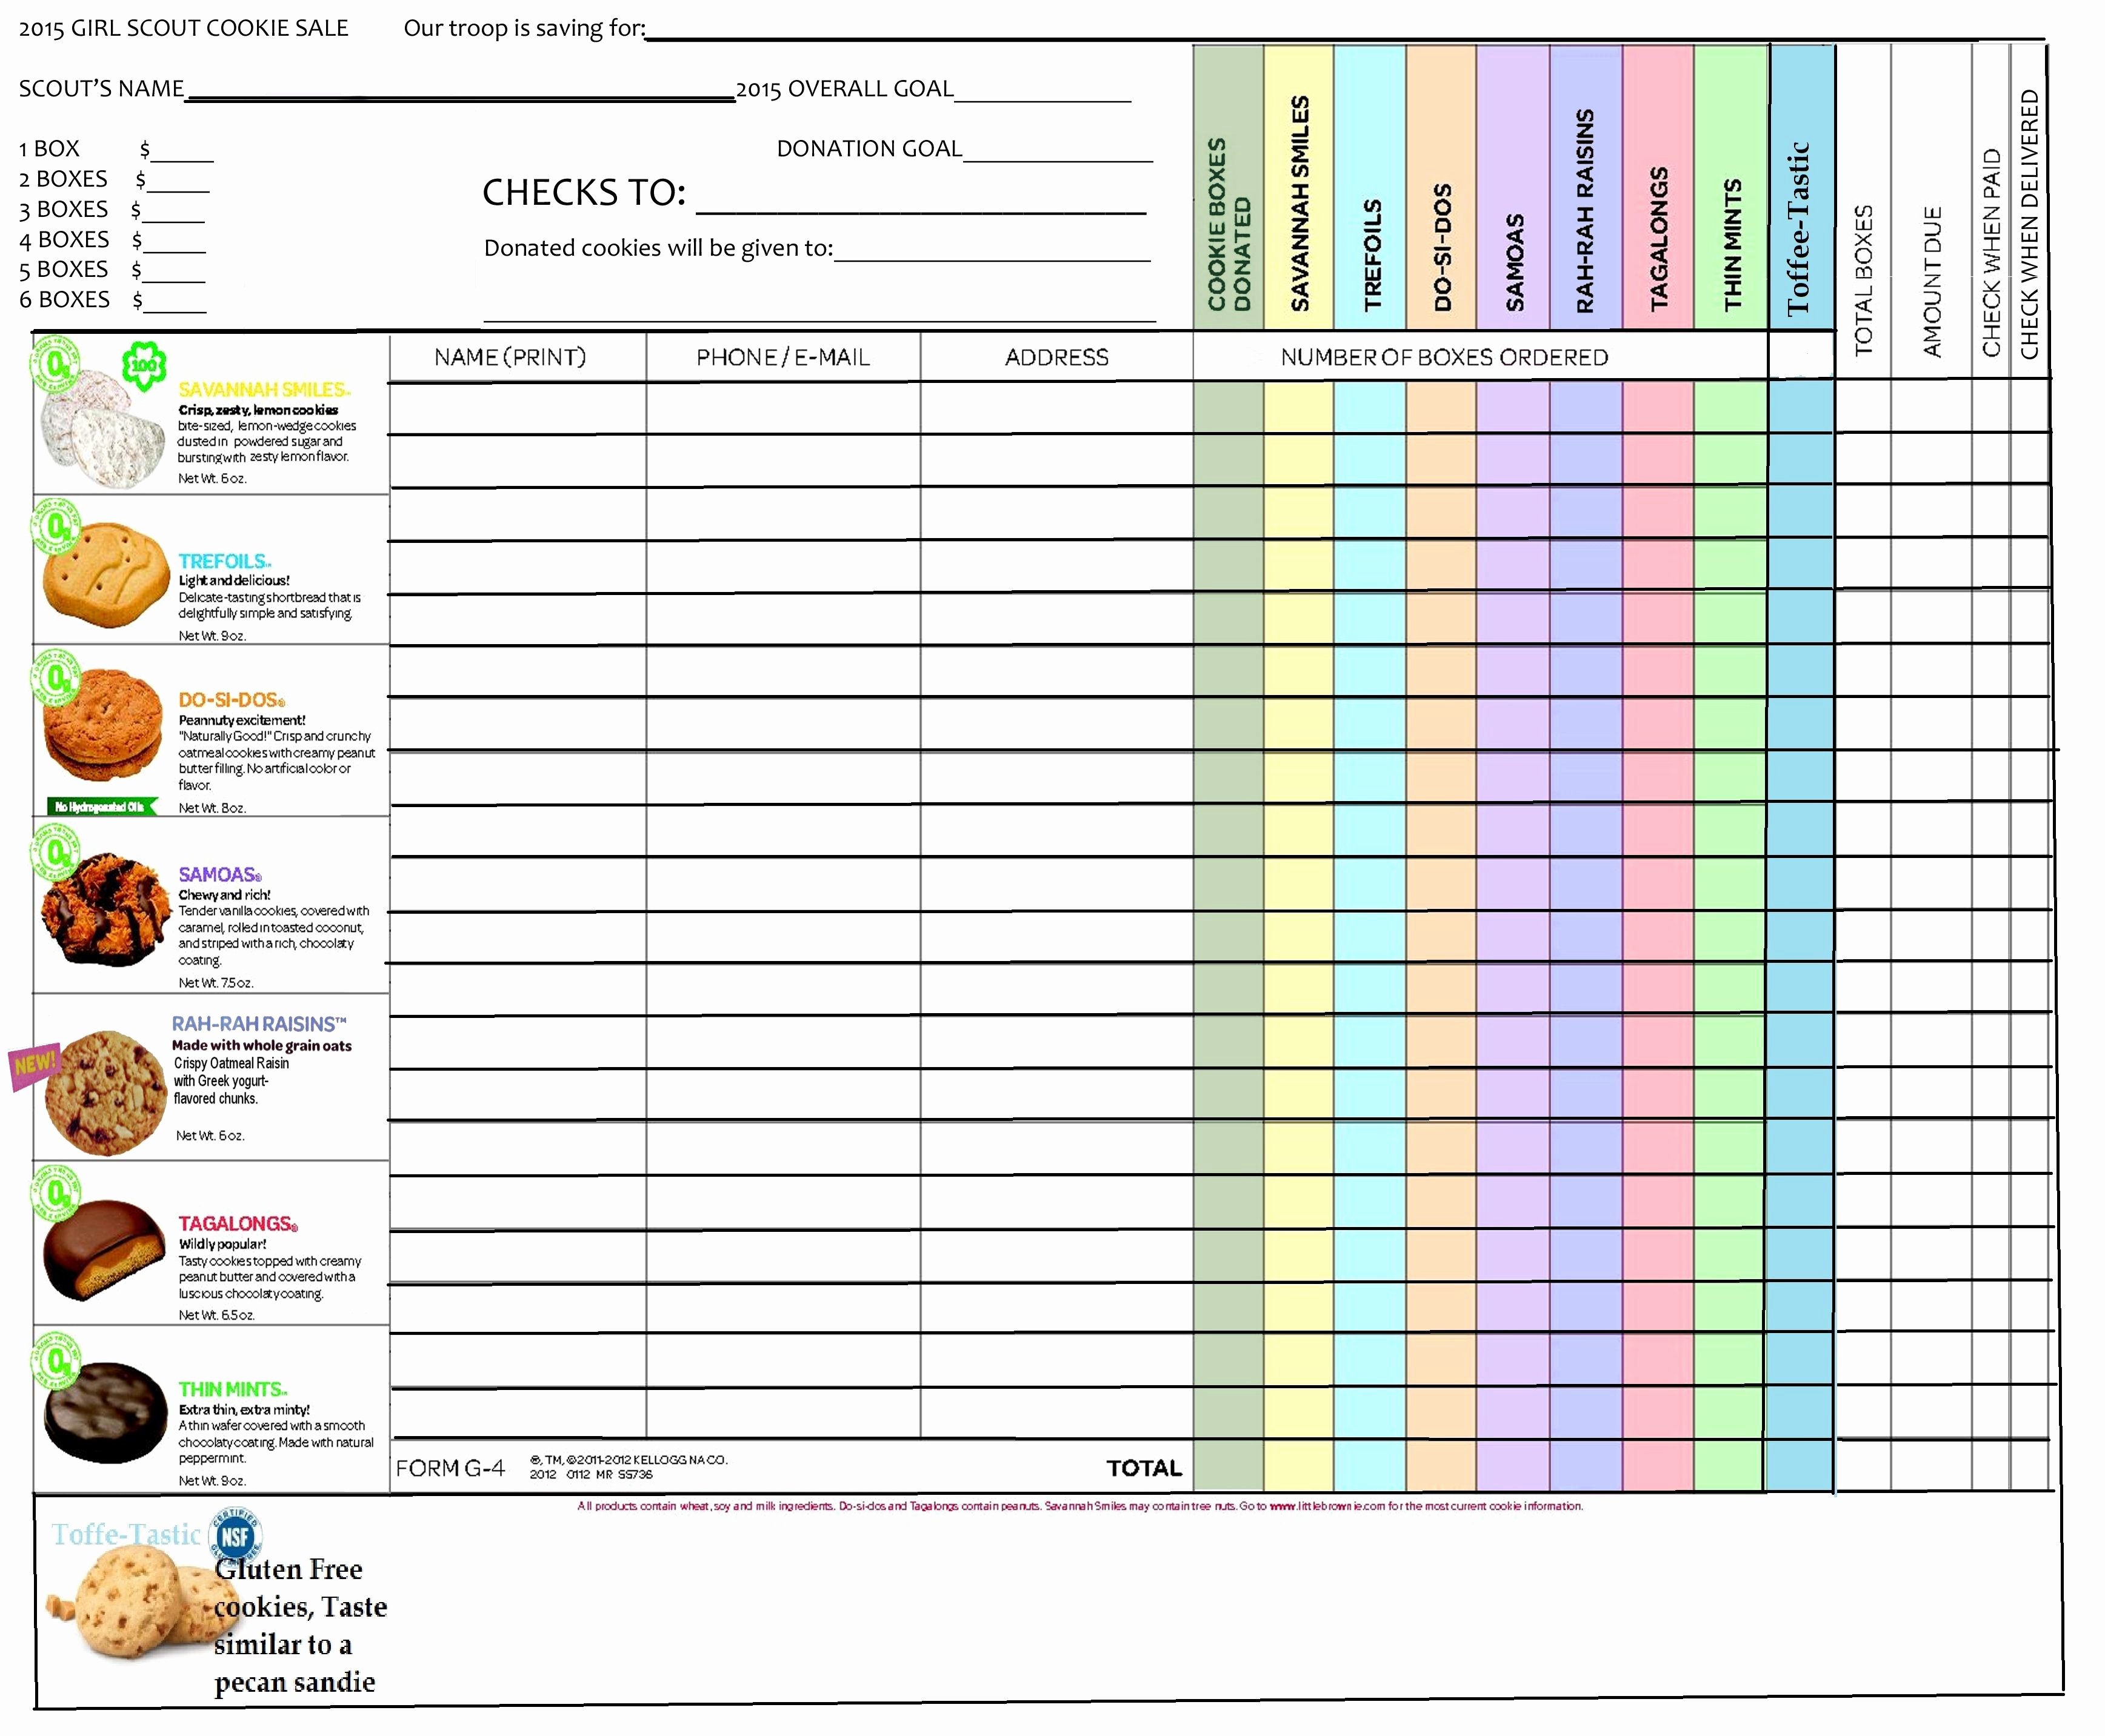 Cookie order form Template Elegant Cookie order form Edited to Include Gluten Free toffee